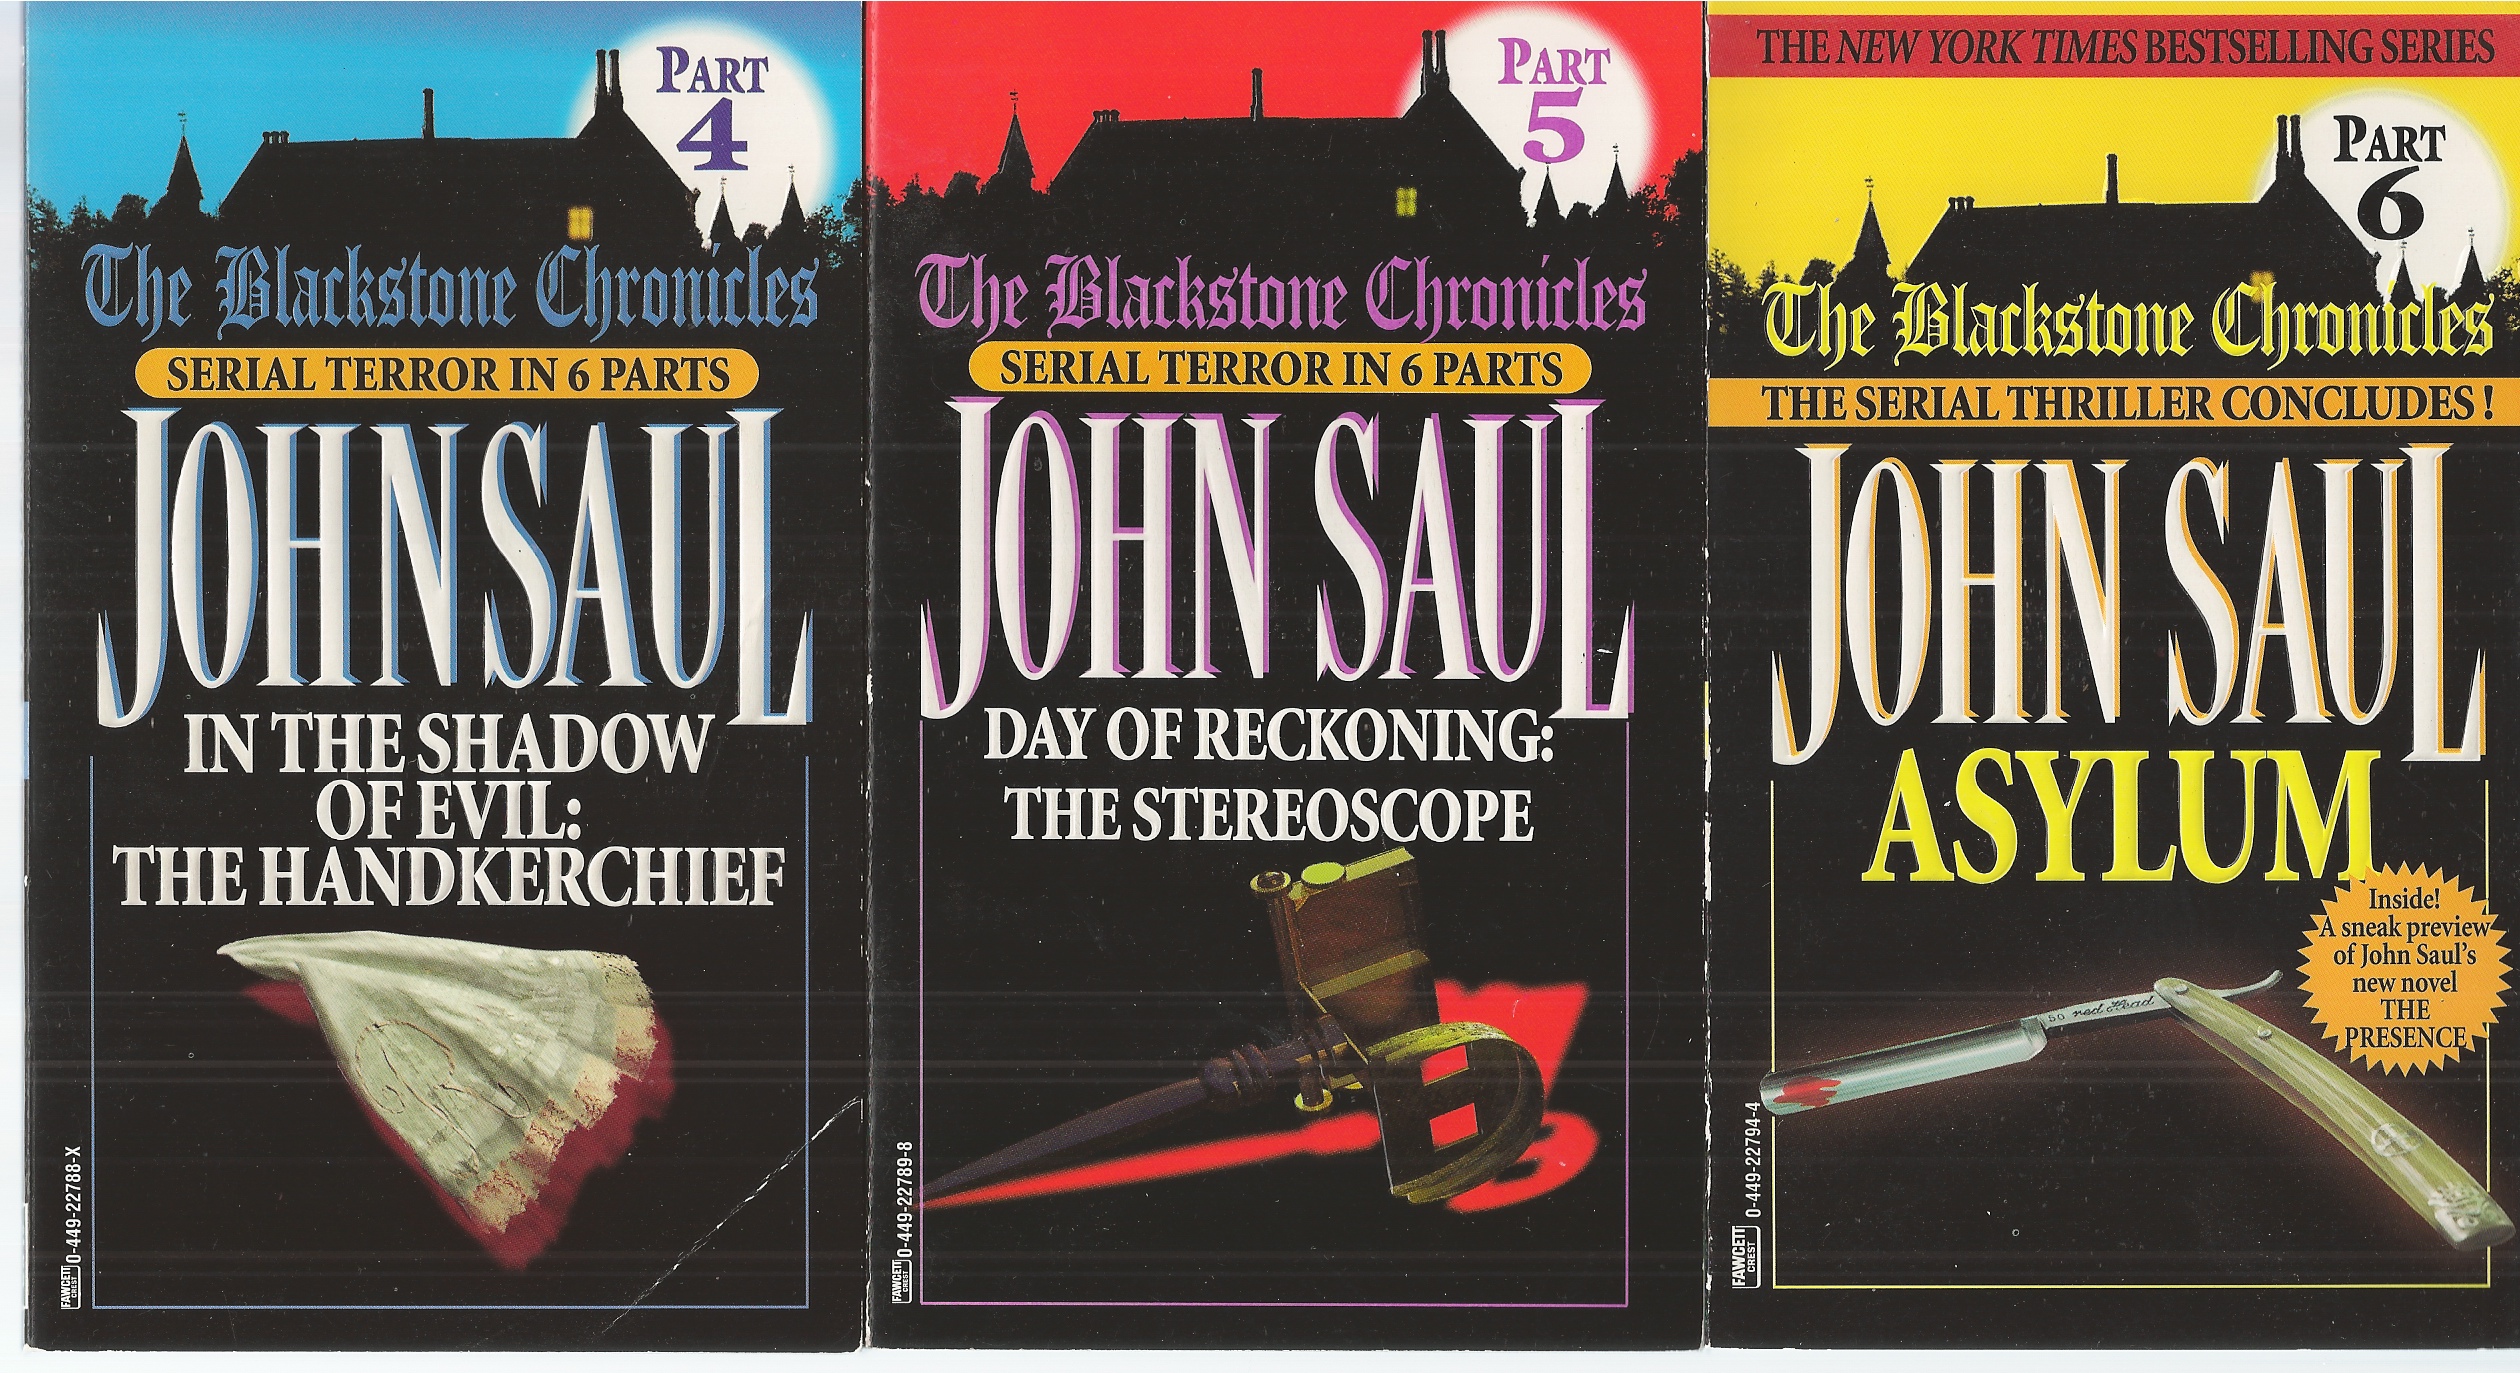 SAUL JOHN - An Eye for an Eye: The Doll, Twist of Fate; the Locket, Ashes to Ashes: The Dragon's Flame, in the Shadow of Evil, the Handkerchief, Day of Reckoning: The Stereoscope, Asylum. The Blackstone Chronicles, Six Volumes